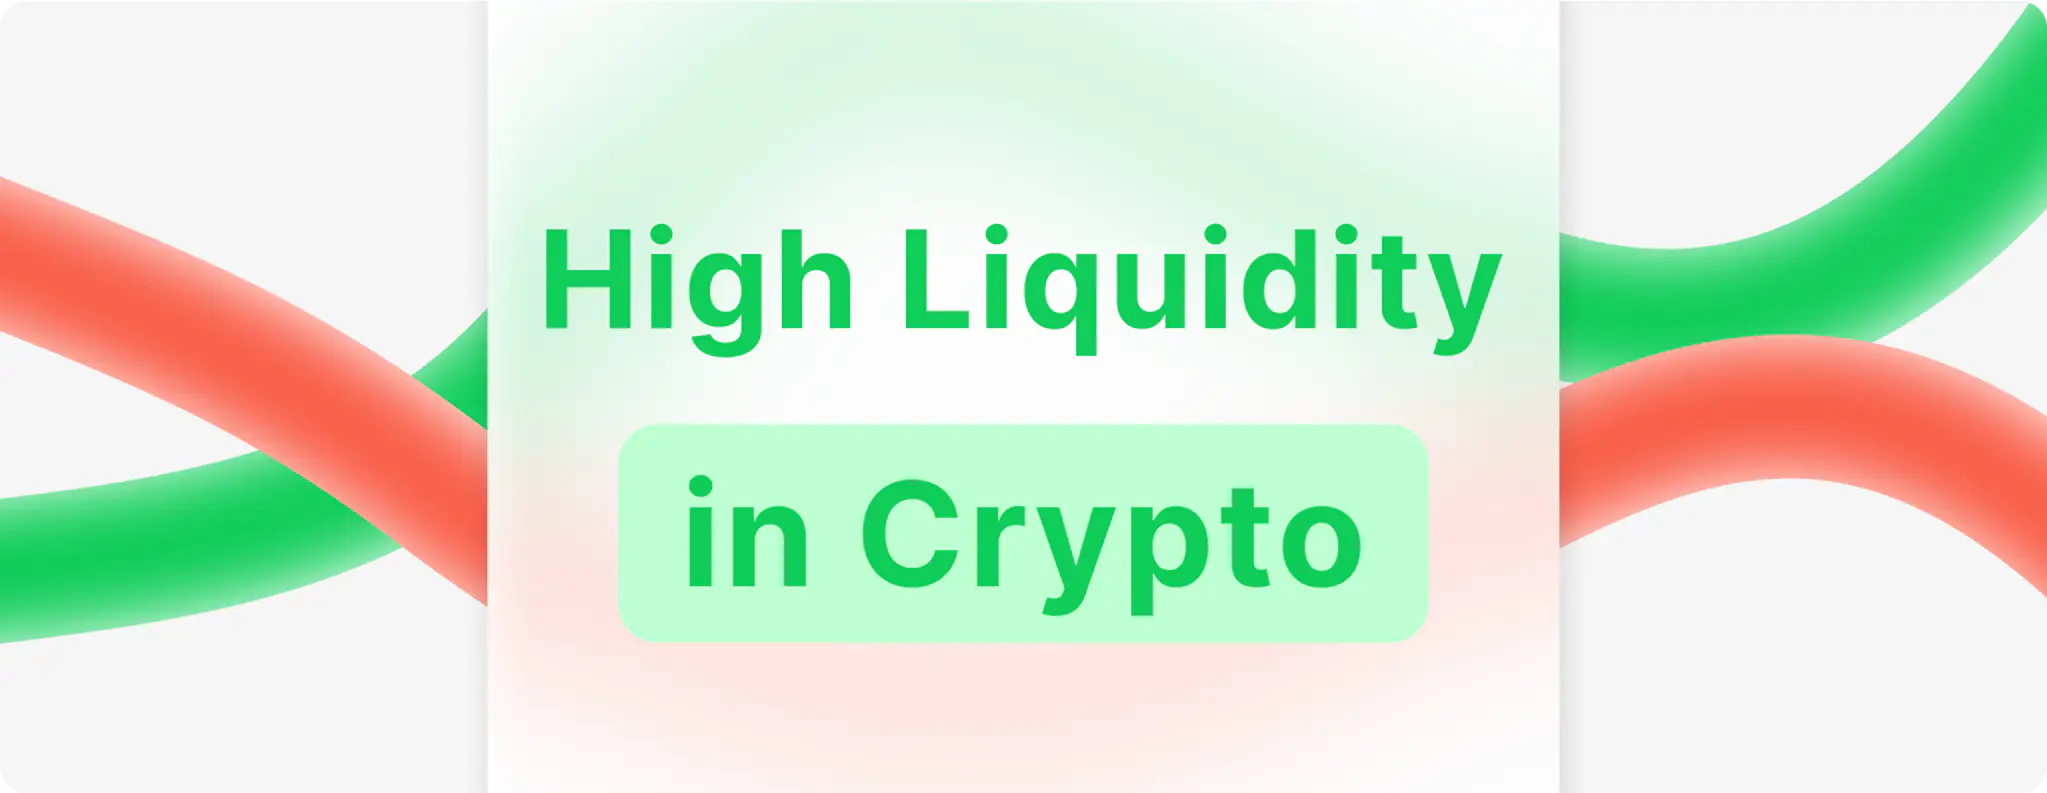 The Importance of High Liquidity in Cryptocurrencie